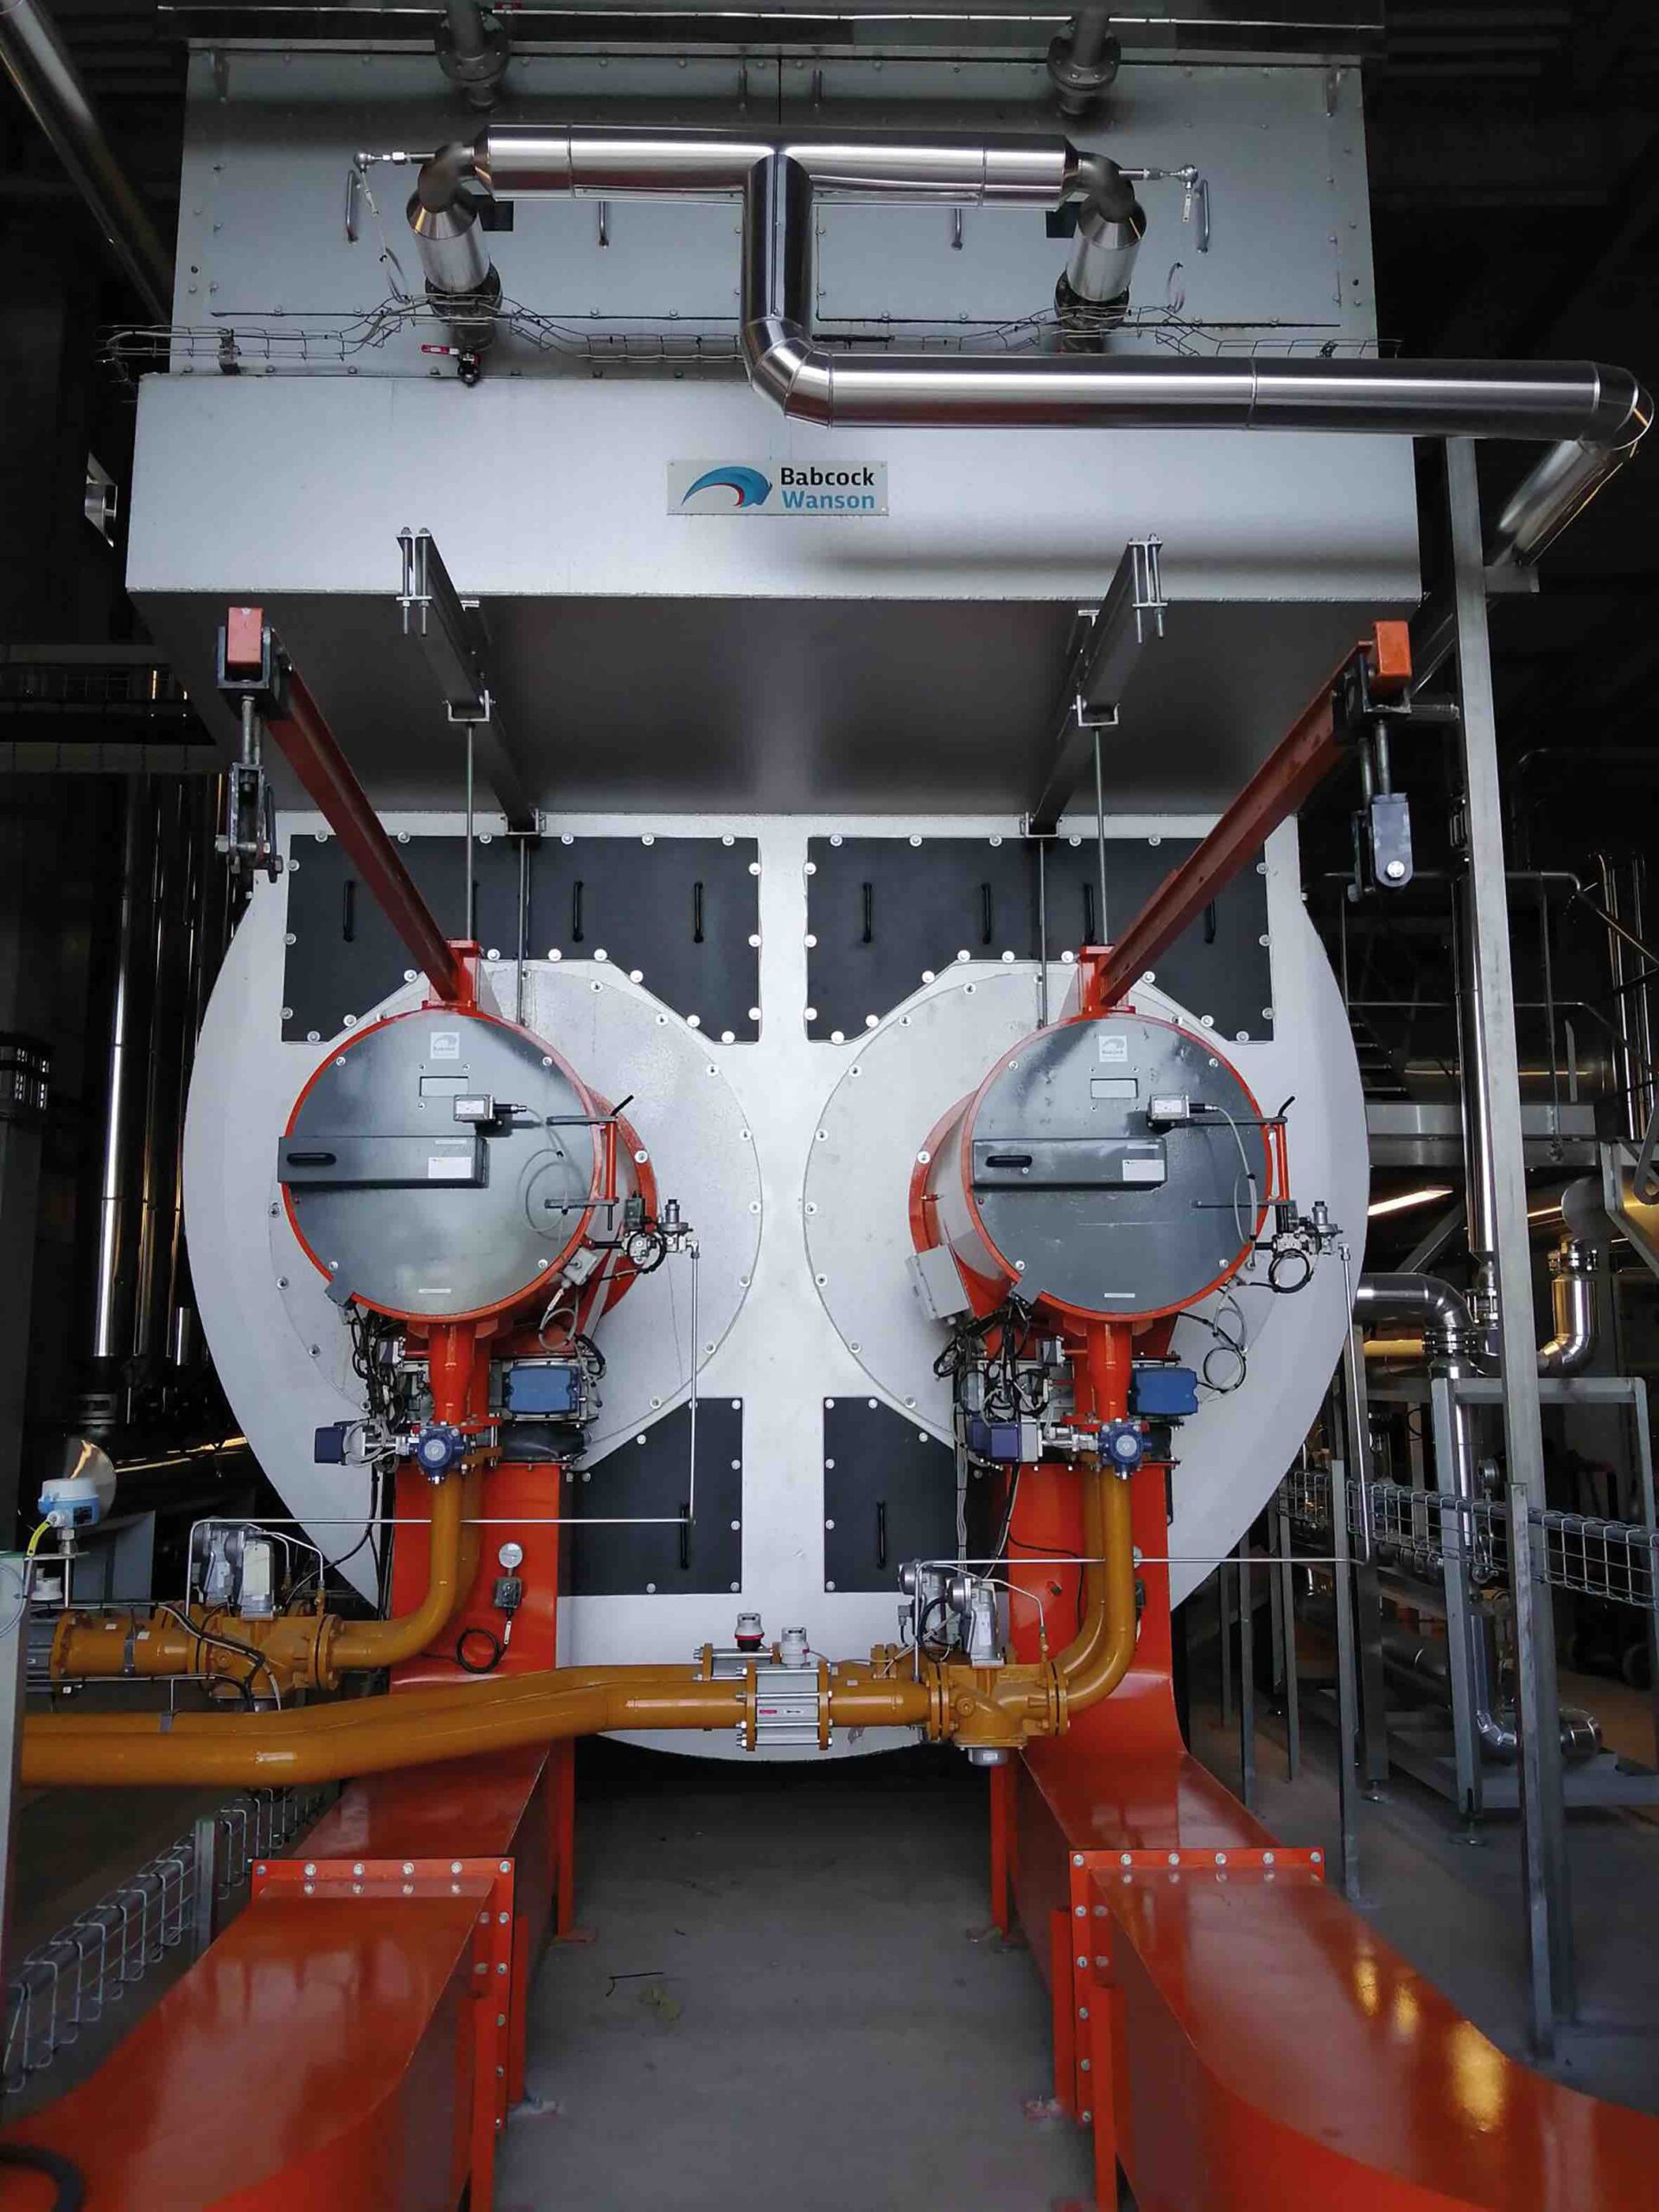 Twin-furnace firetube boilers for steam outputs from 30 t/h to 58 t/h